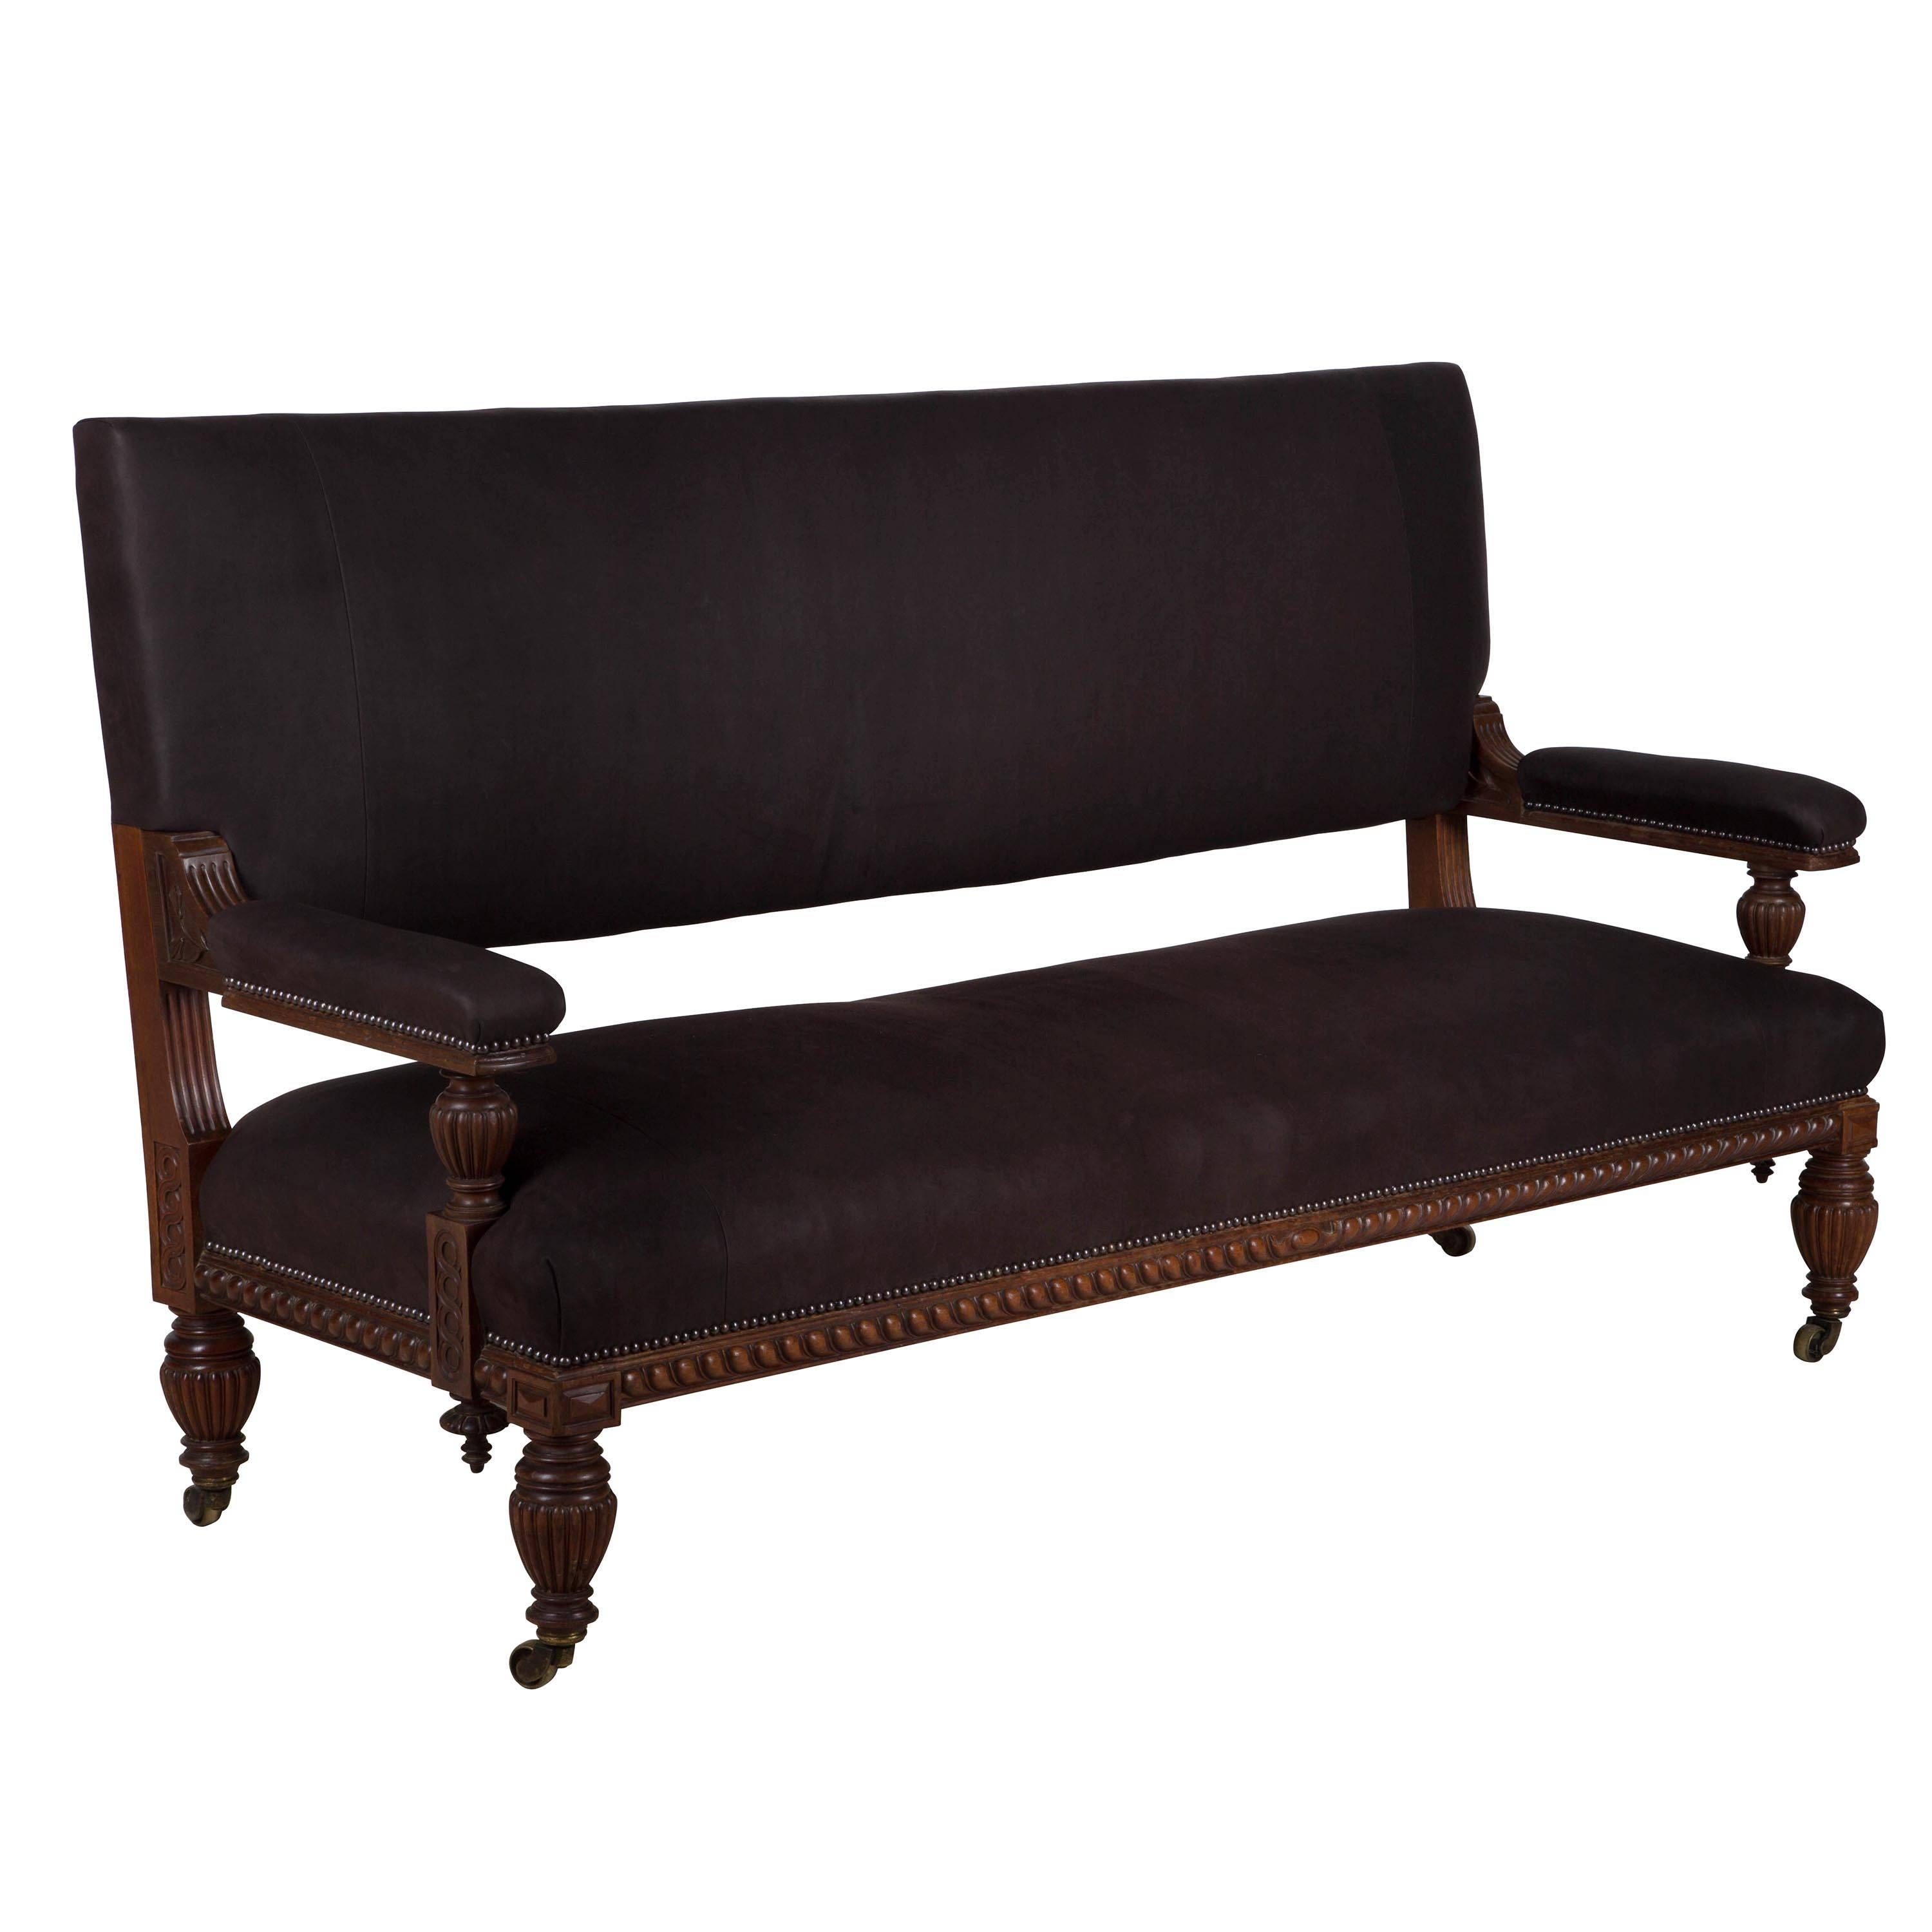 A handsome mid-19th century English carved mahogany hall bench – recovered in a soft and luxurious Argentinean leather.